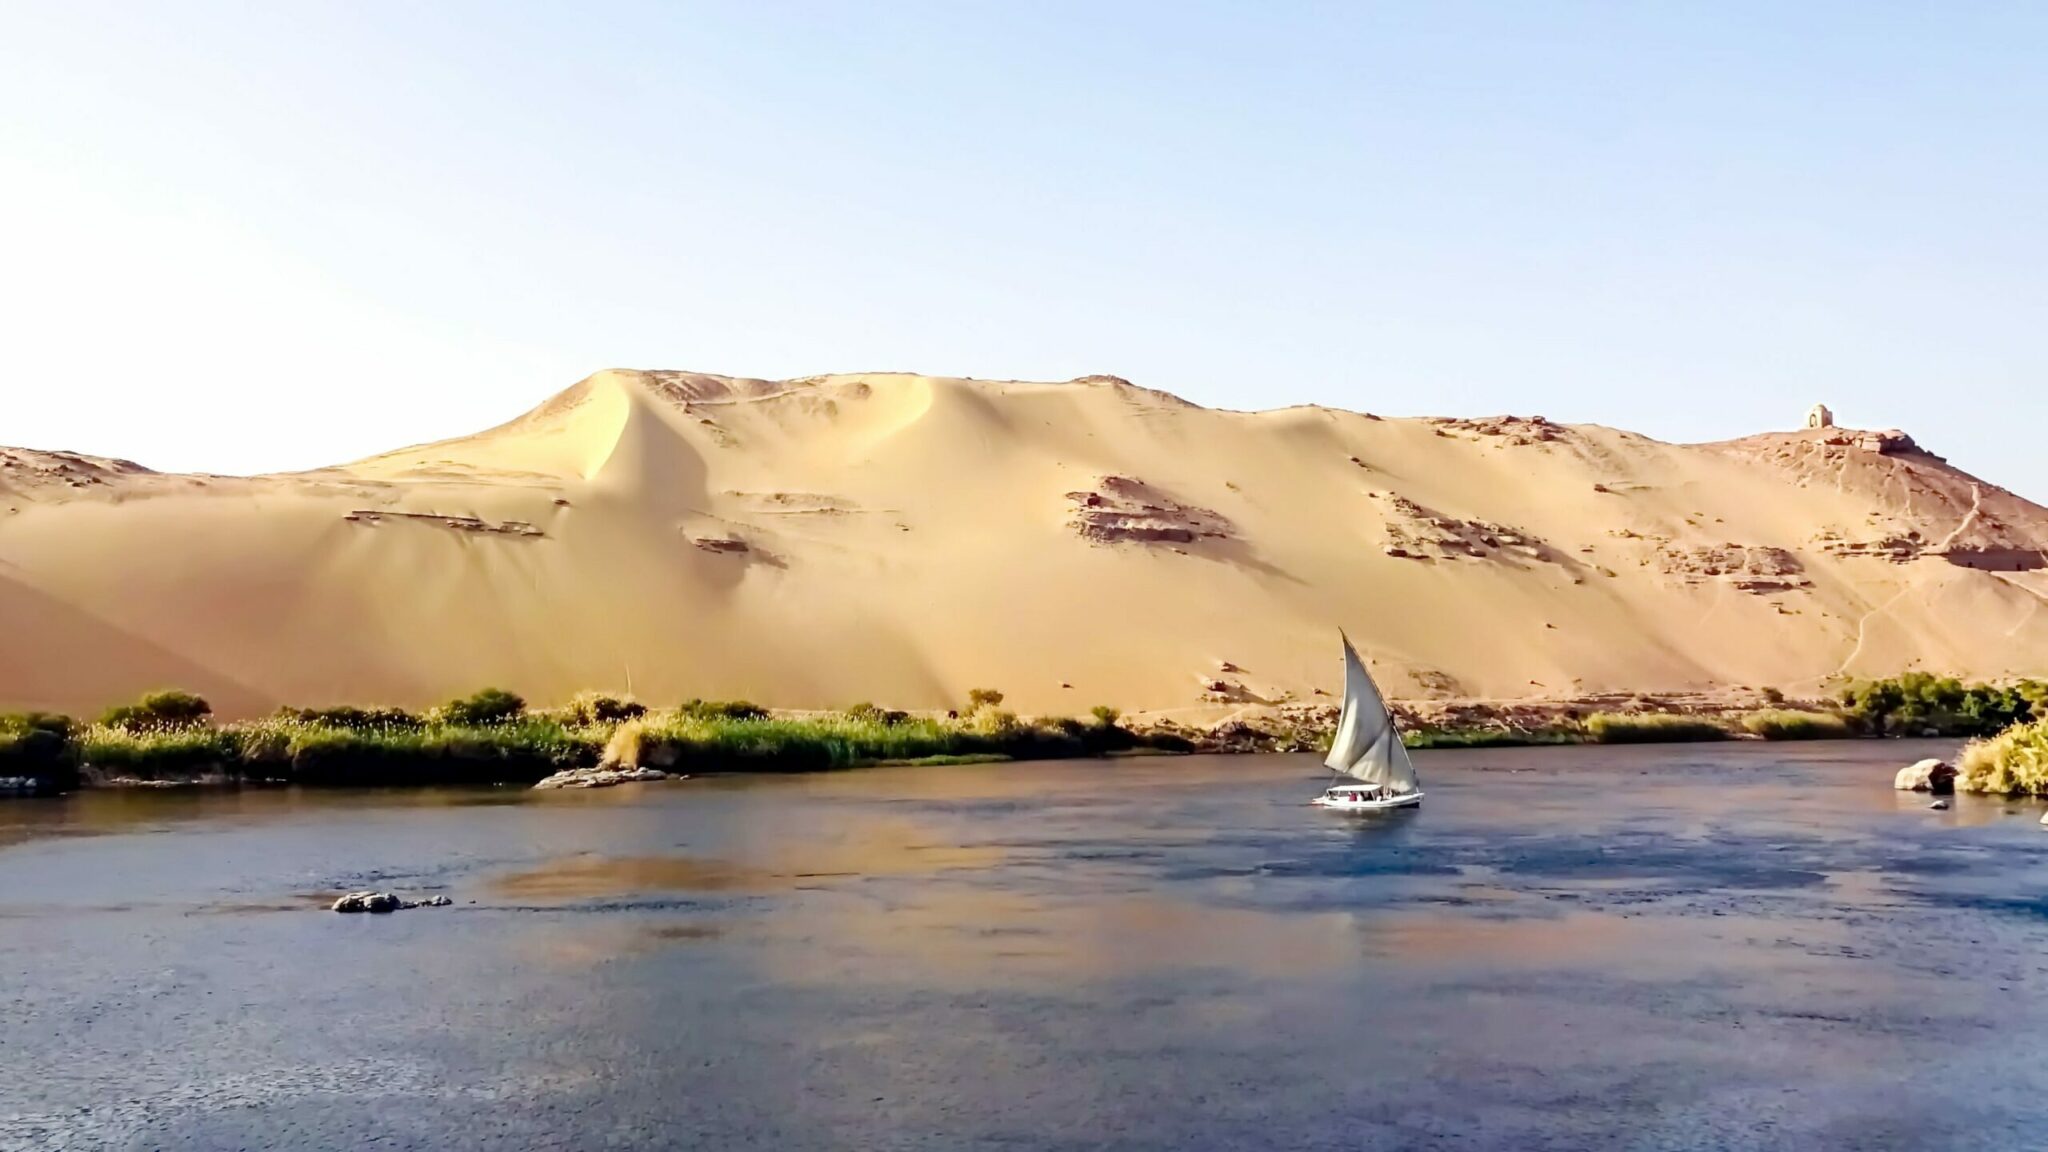 how large is the aswan high dam on the nile river and why was the aswan dam in egypt built scaled